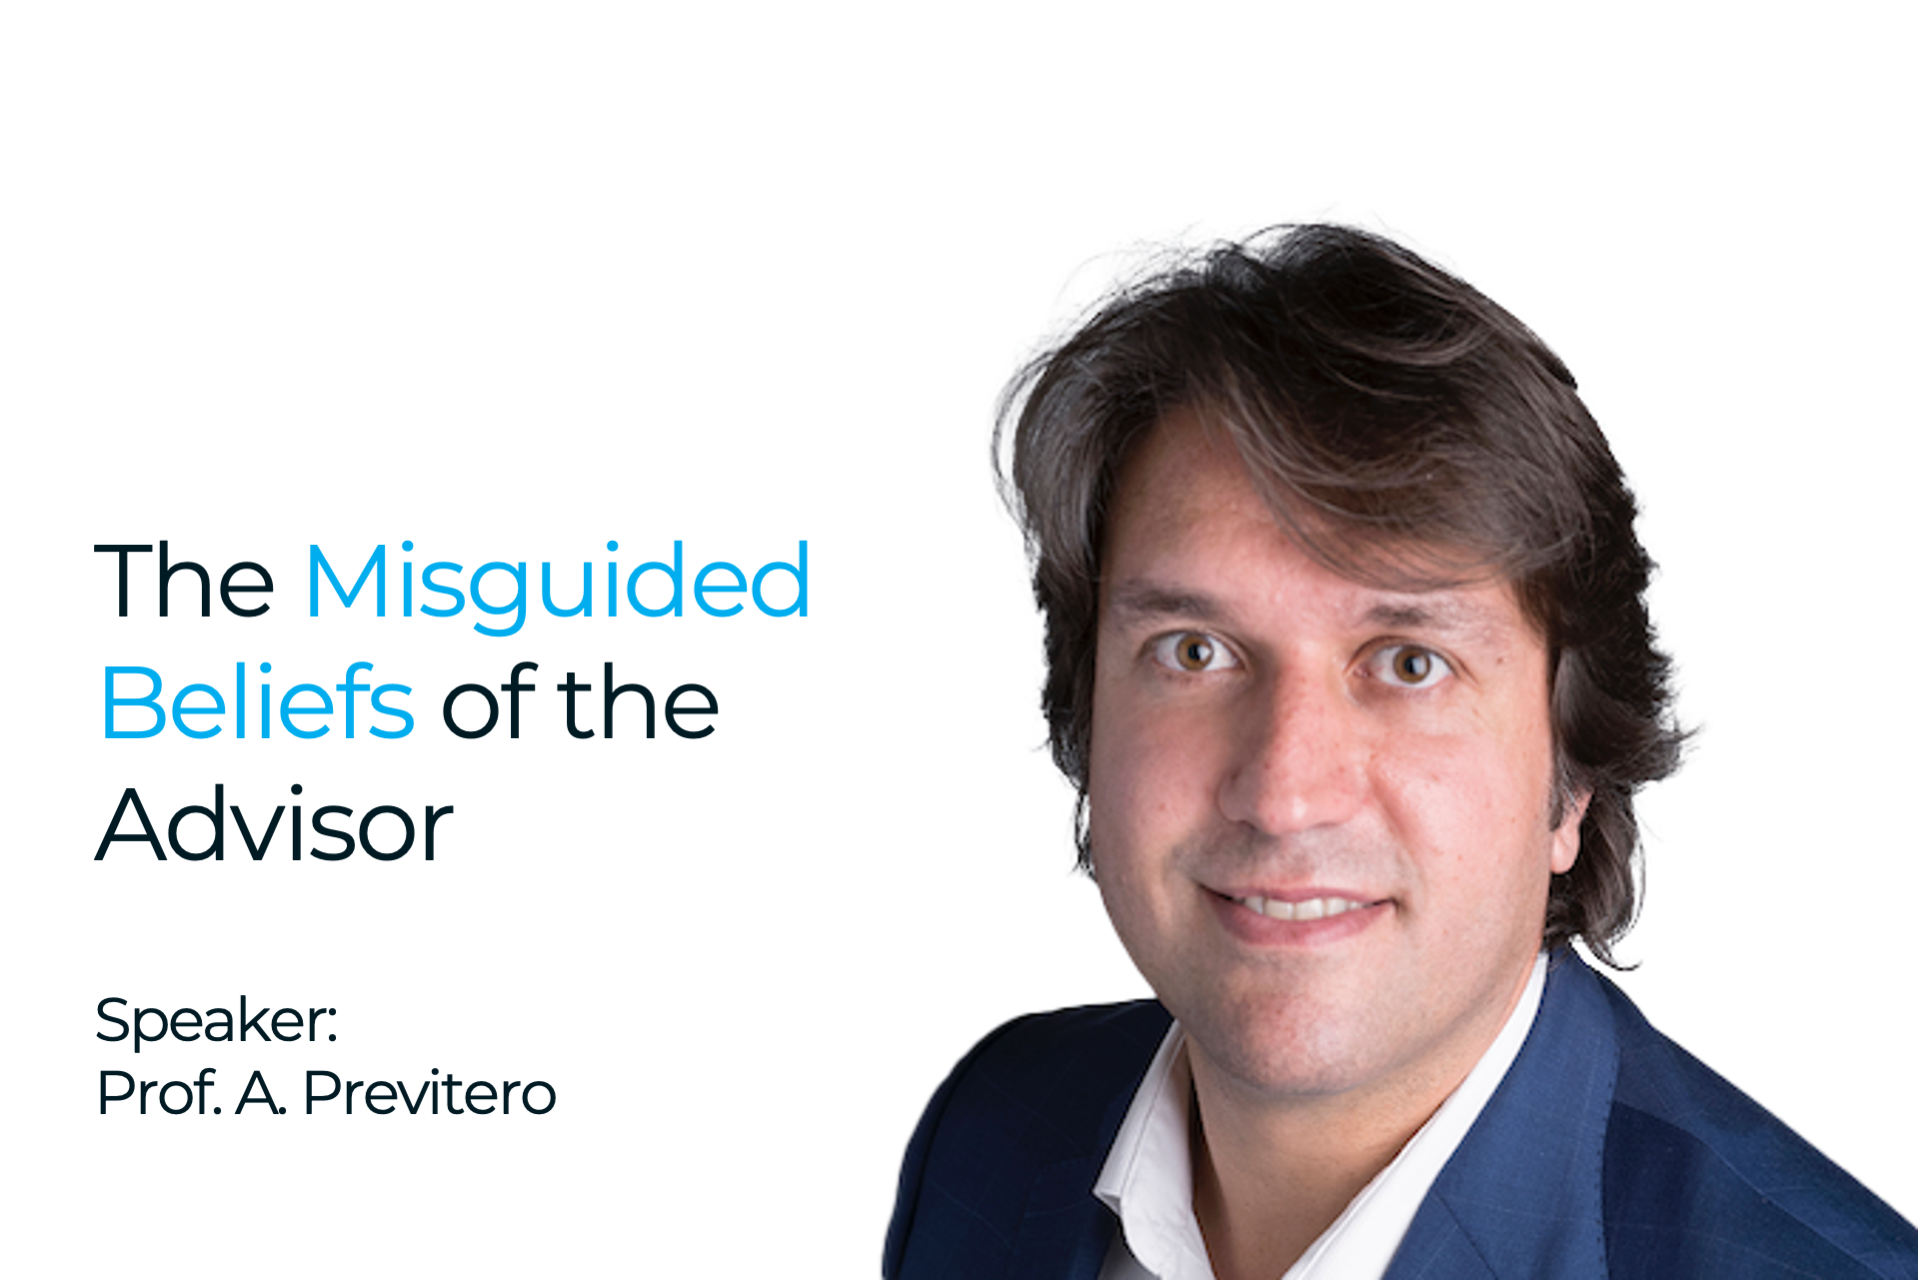 Prof. Alessandro Previtero on the misguided beliefs of the advisors